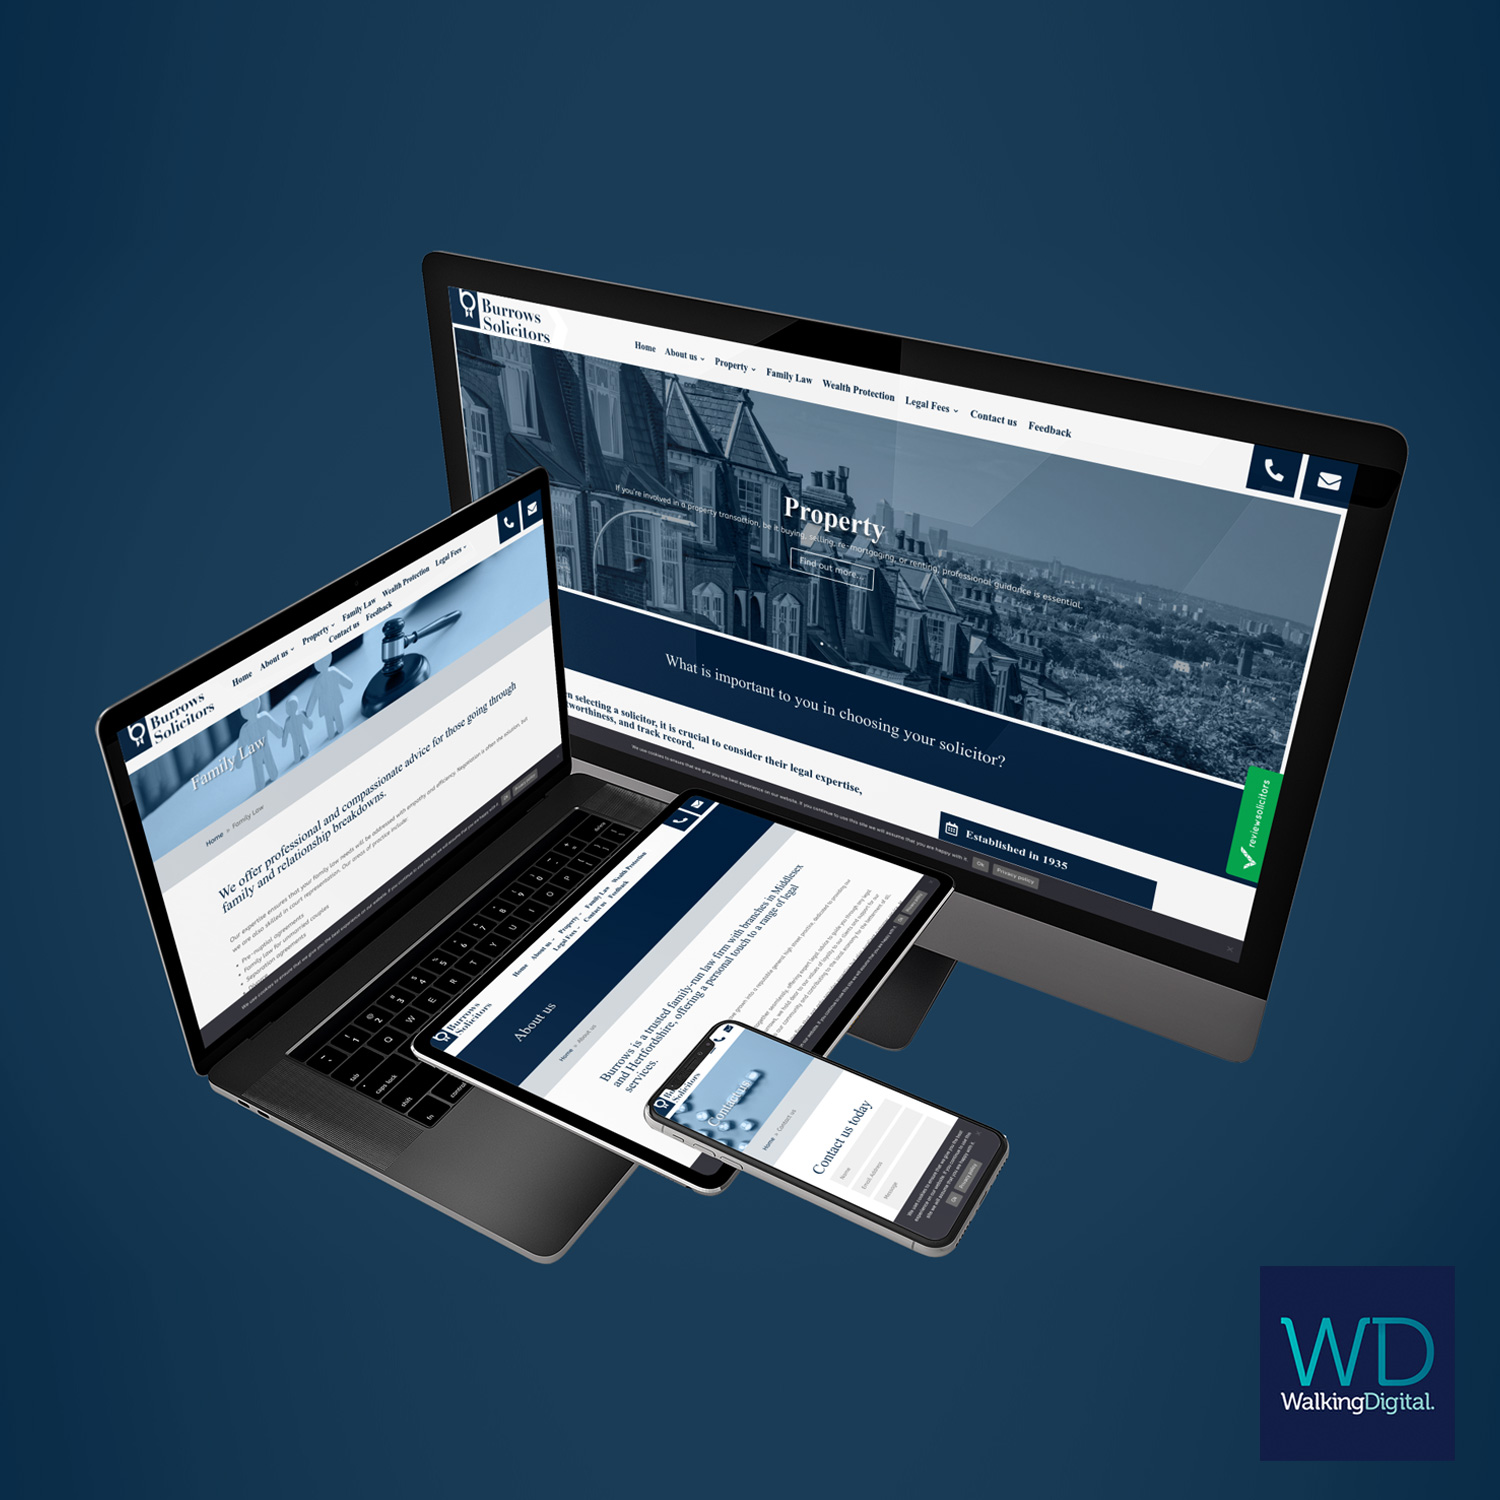 Burrows Solicitors website on multiple devices